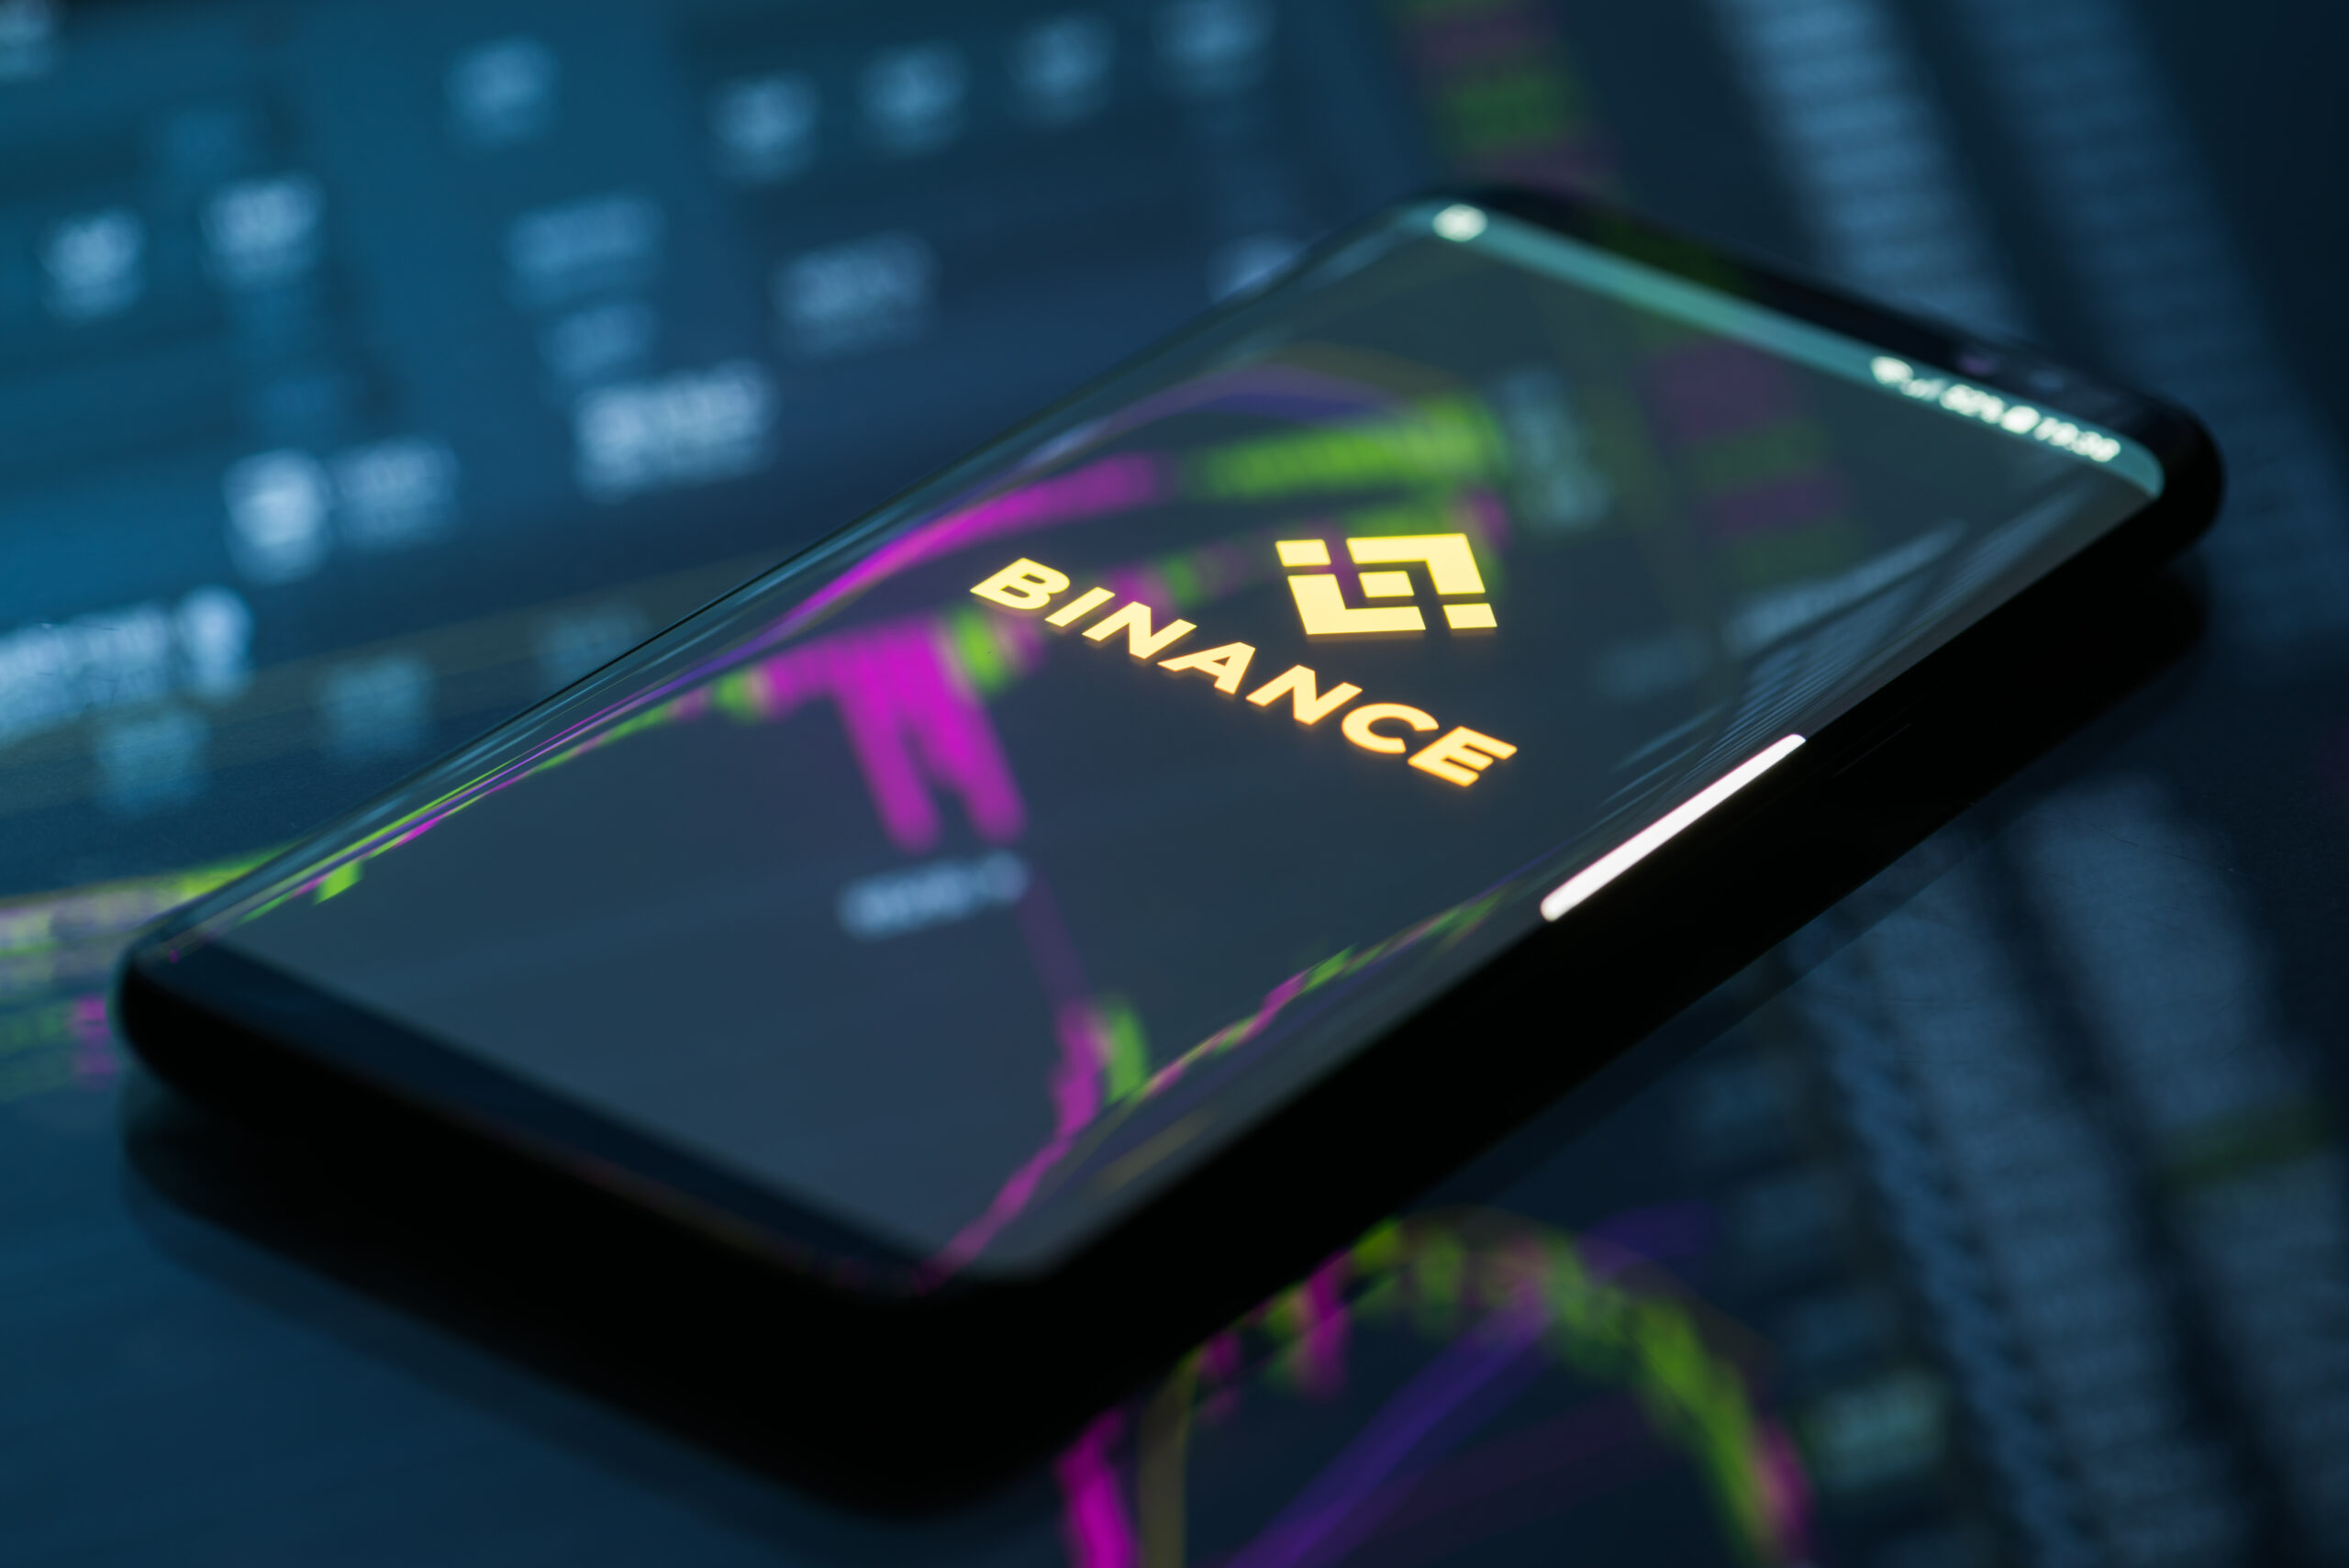 SEC accuses Binance.US of not cooperating with investigation